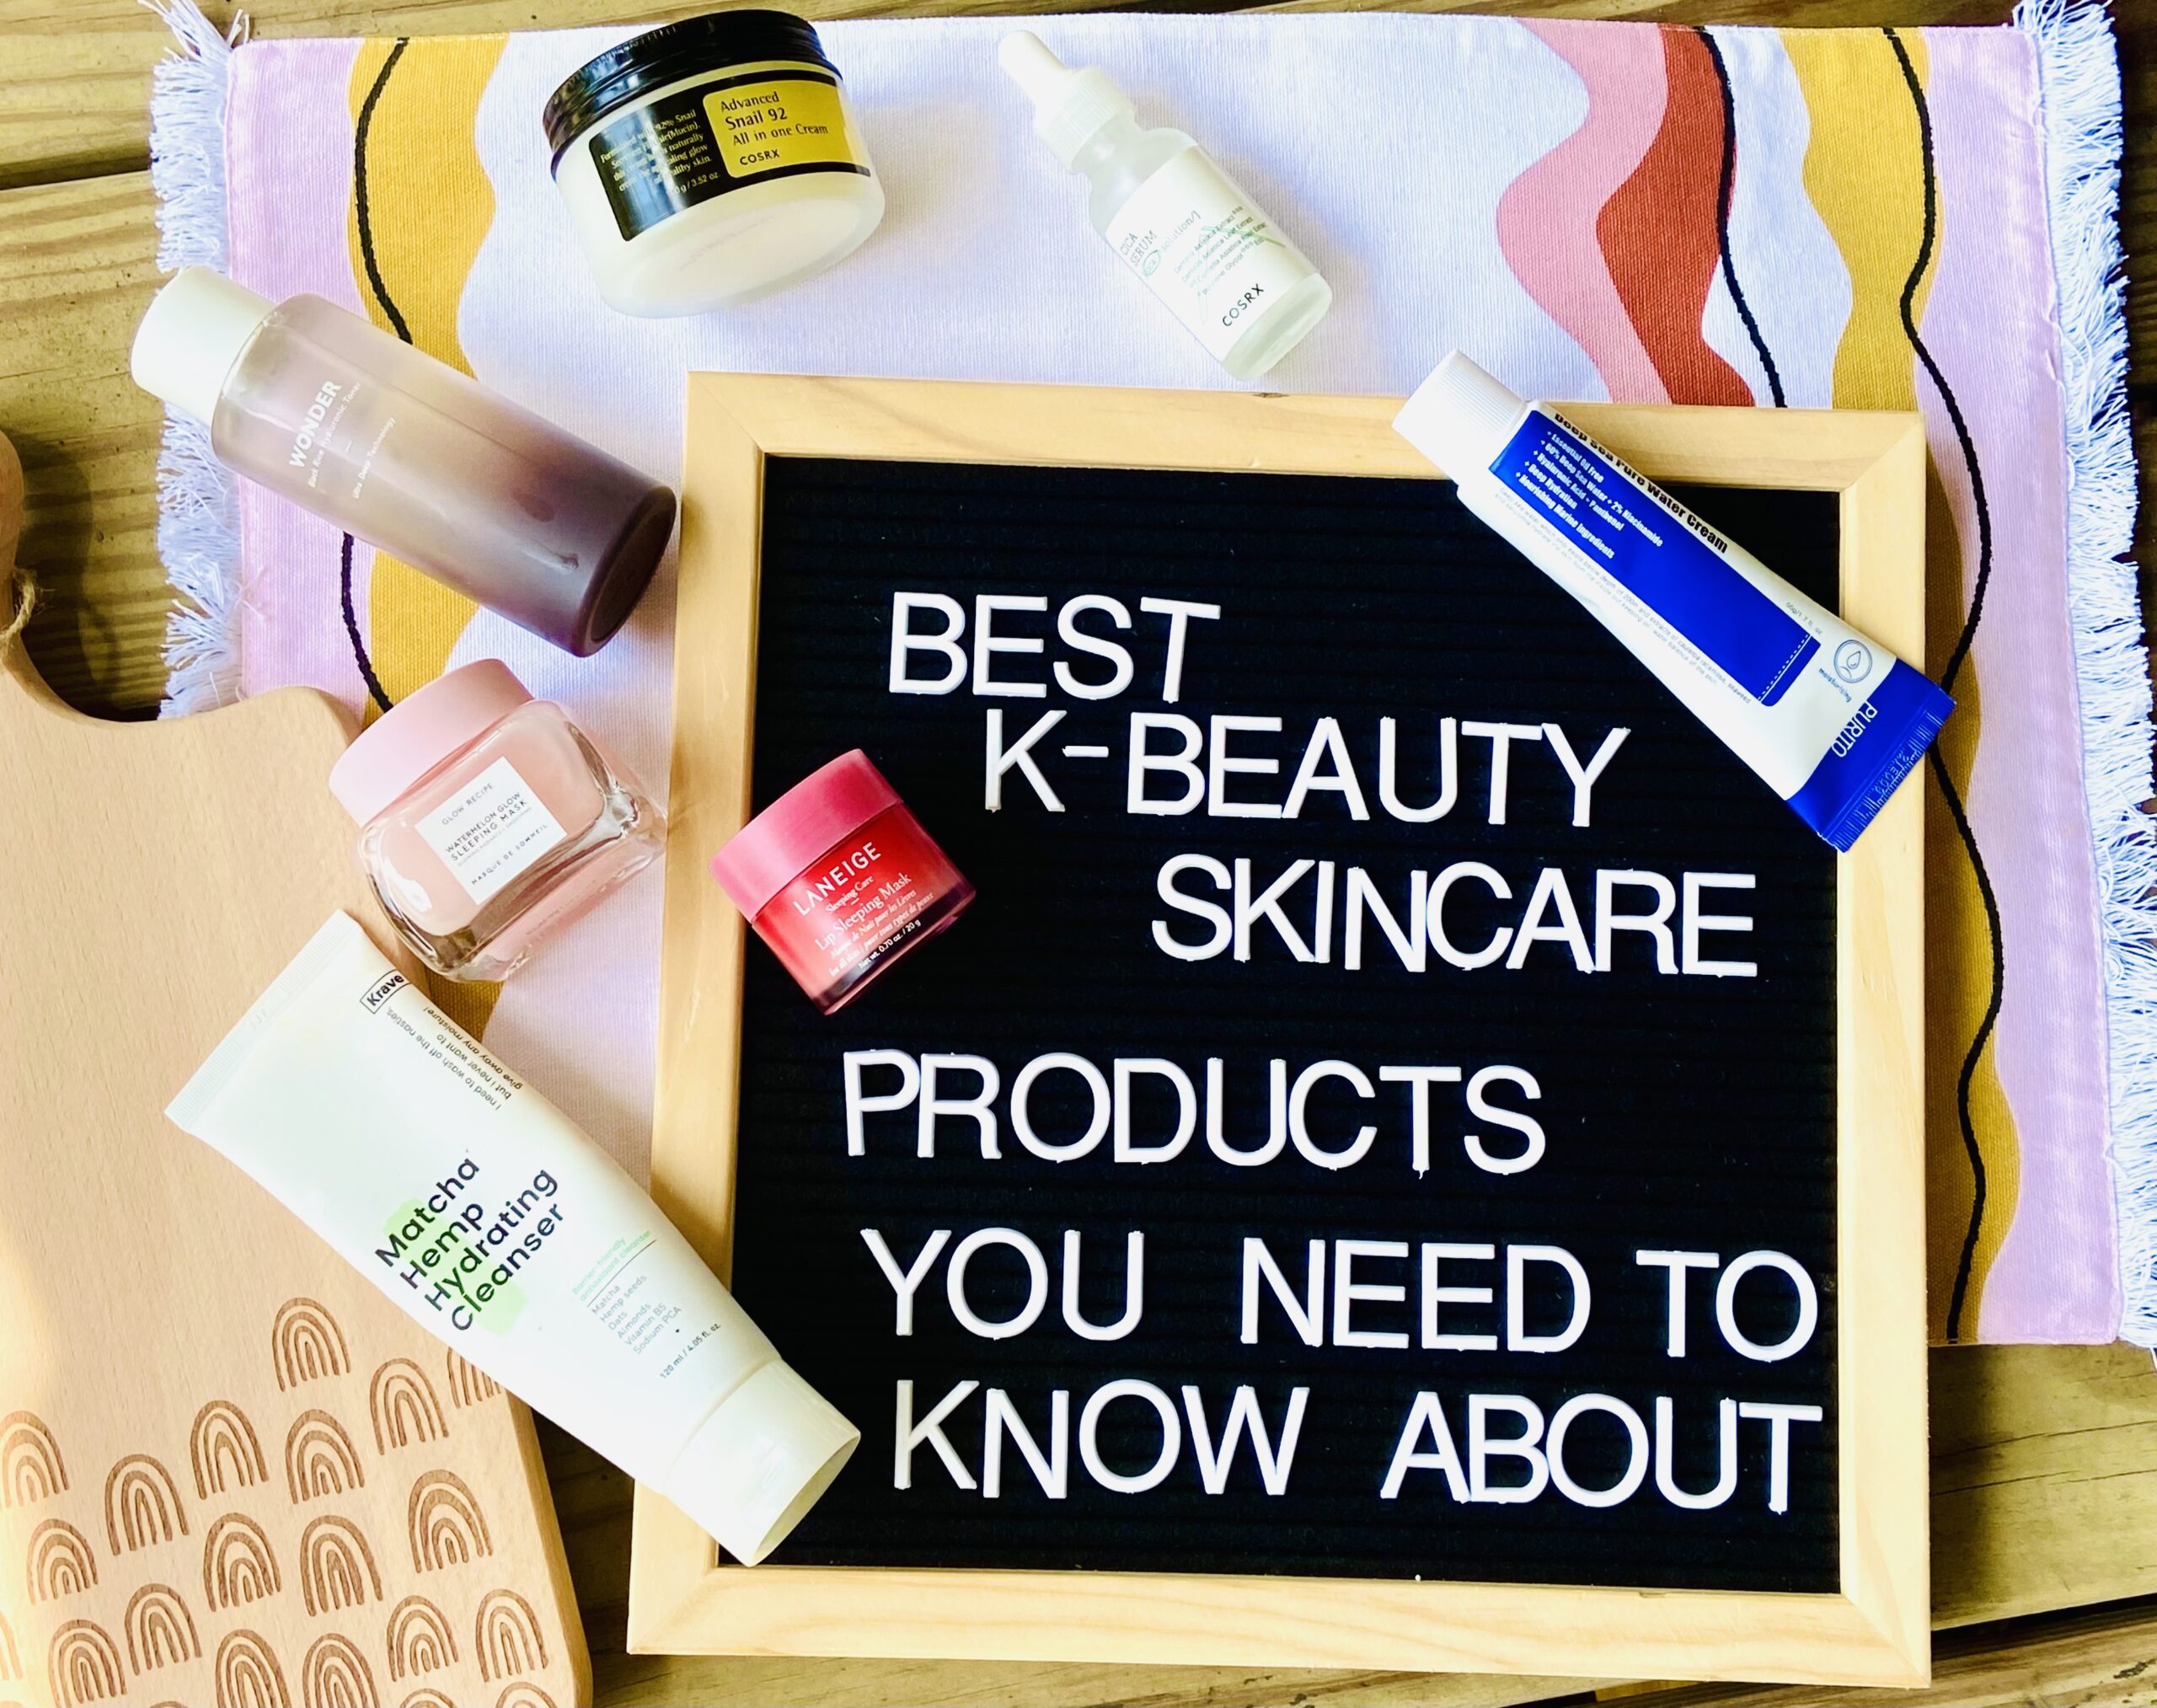 The Best K-Beauty Skincare Products You Need to Know About